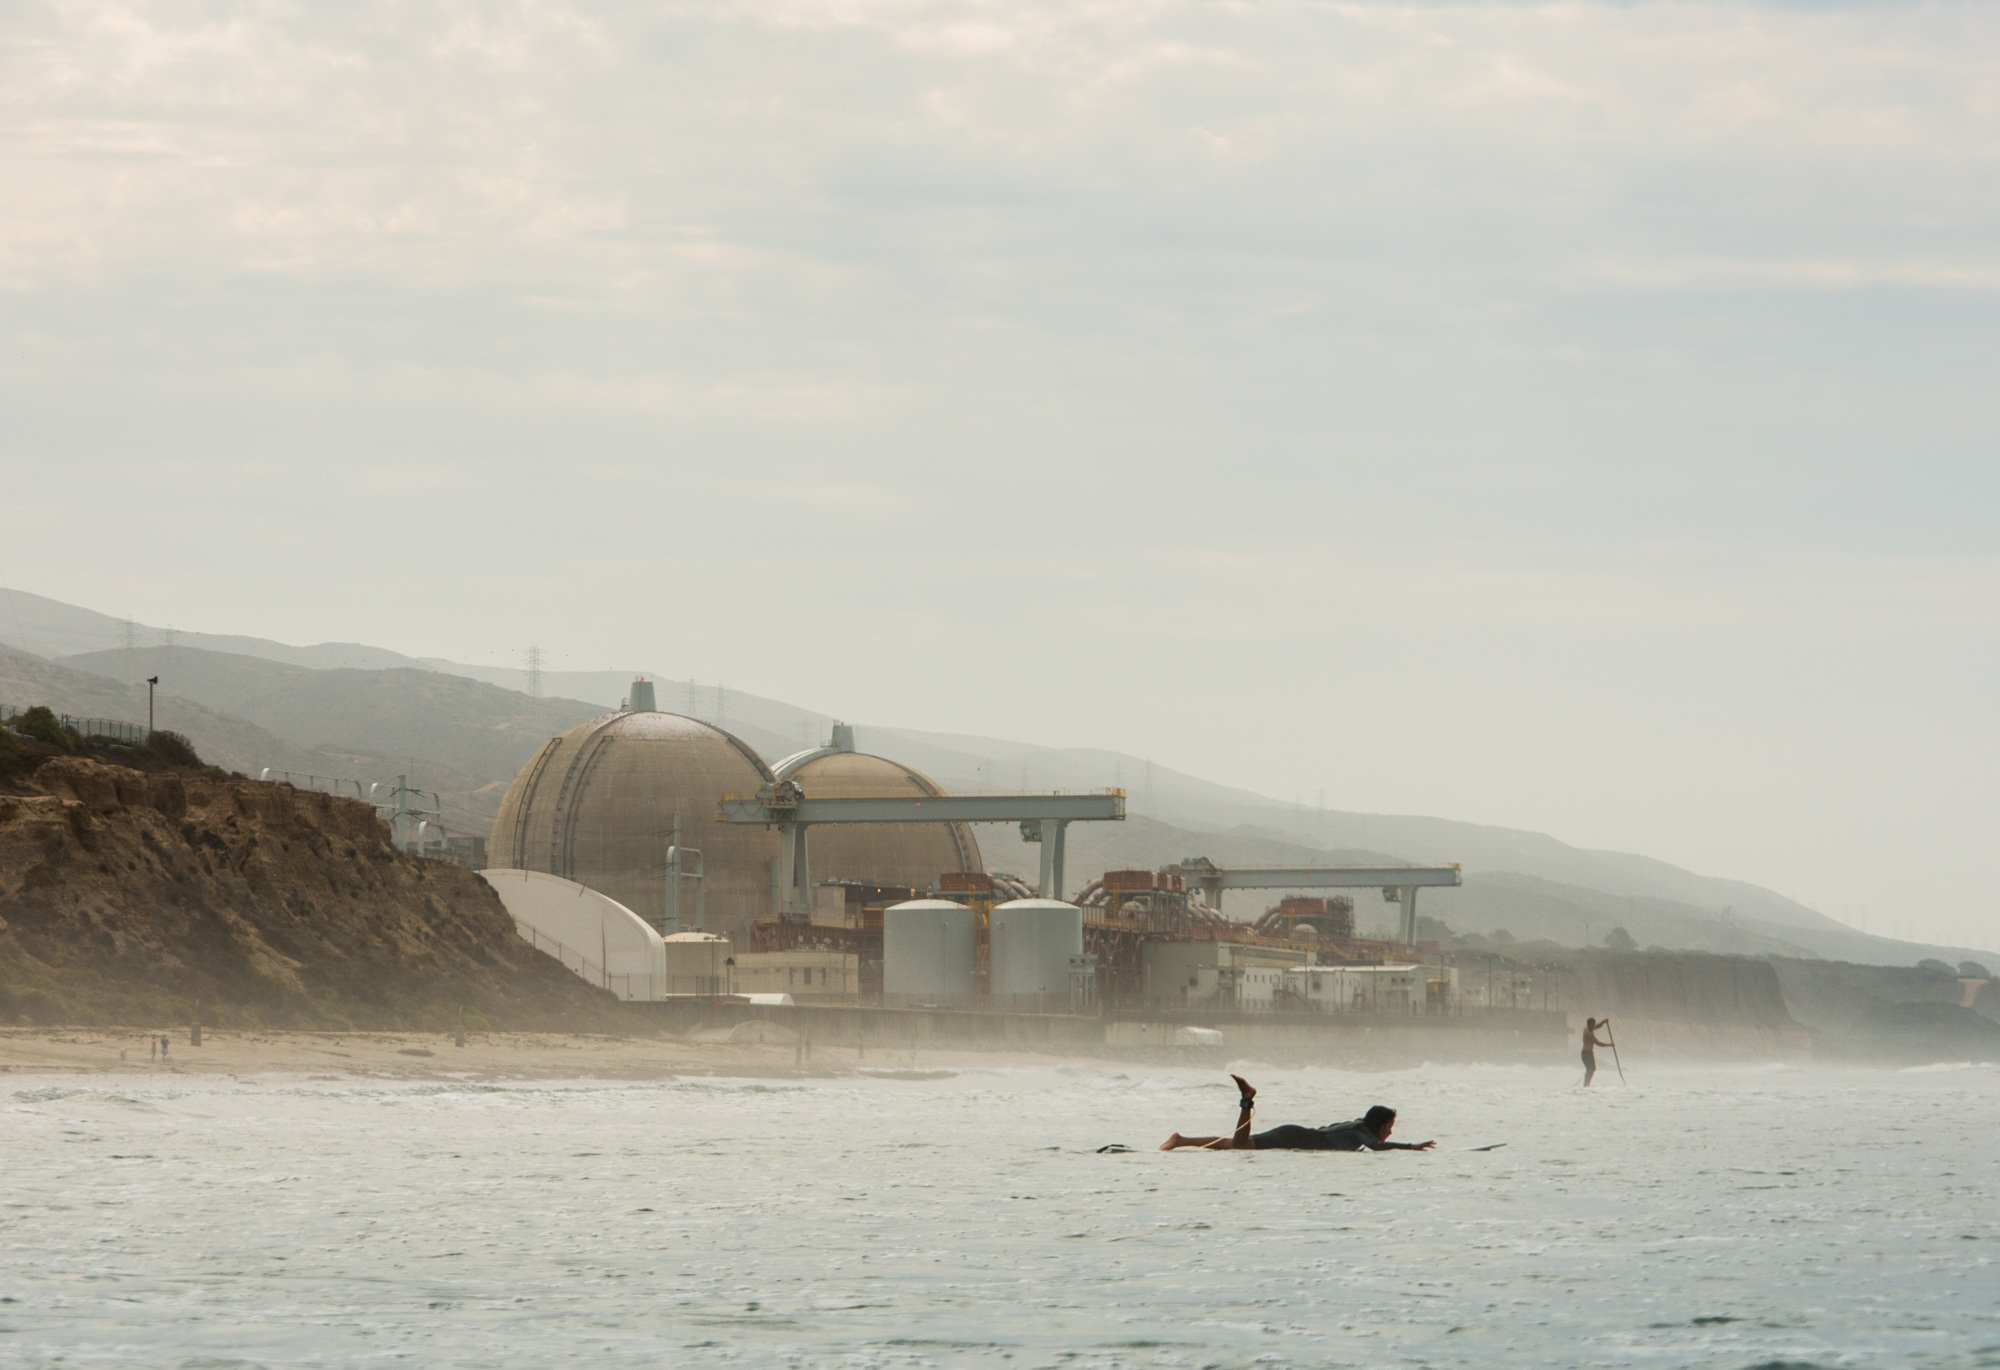 A surfer paddles out in front of the San Onofre Nuclear Plant in San Clemente, Calif.